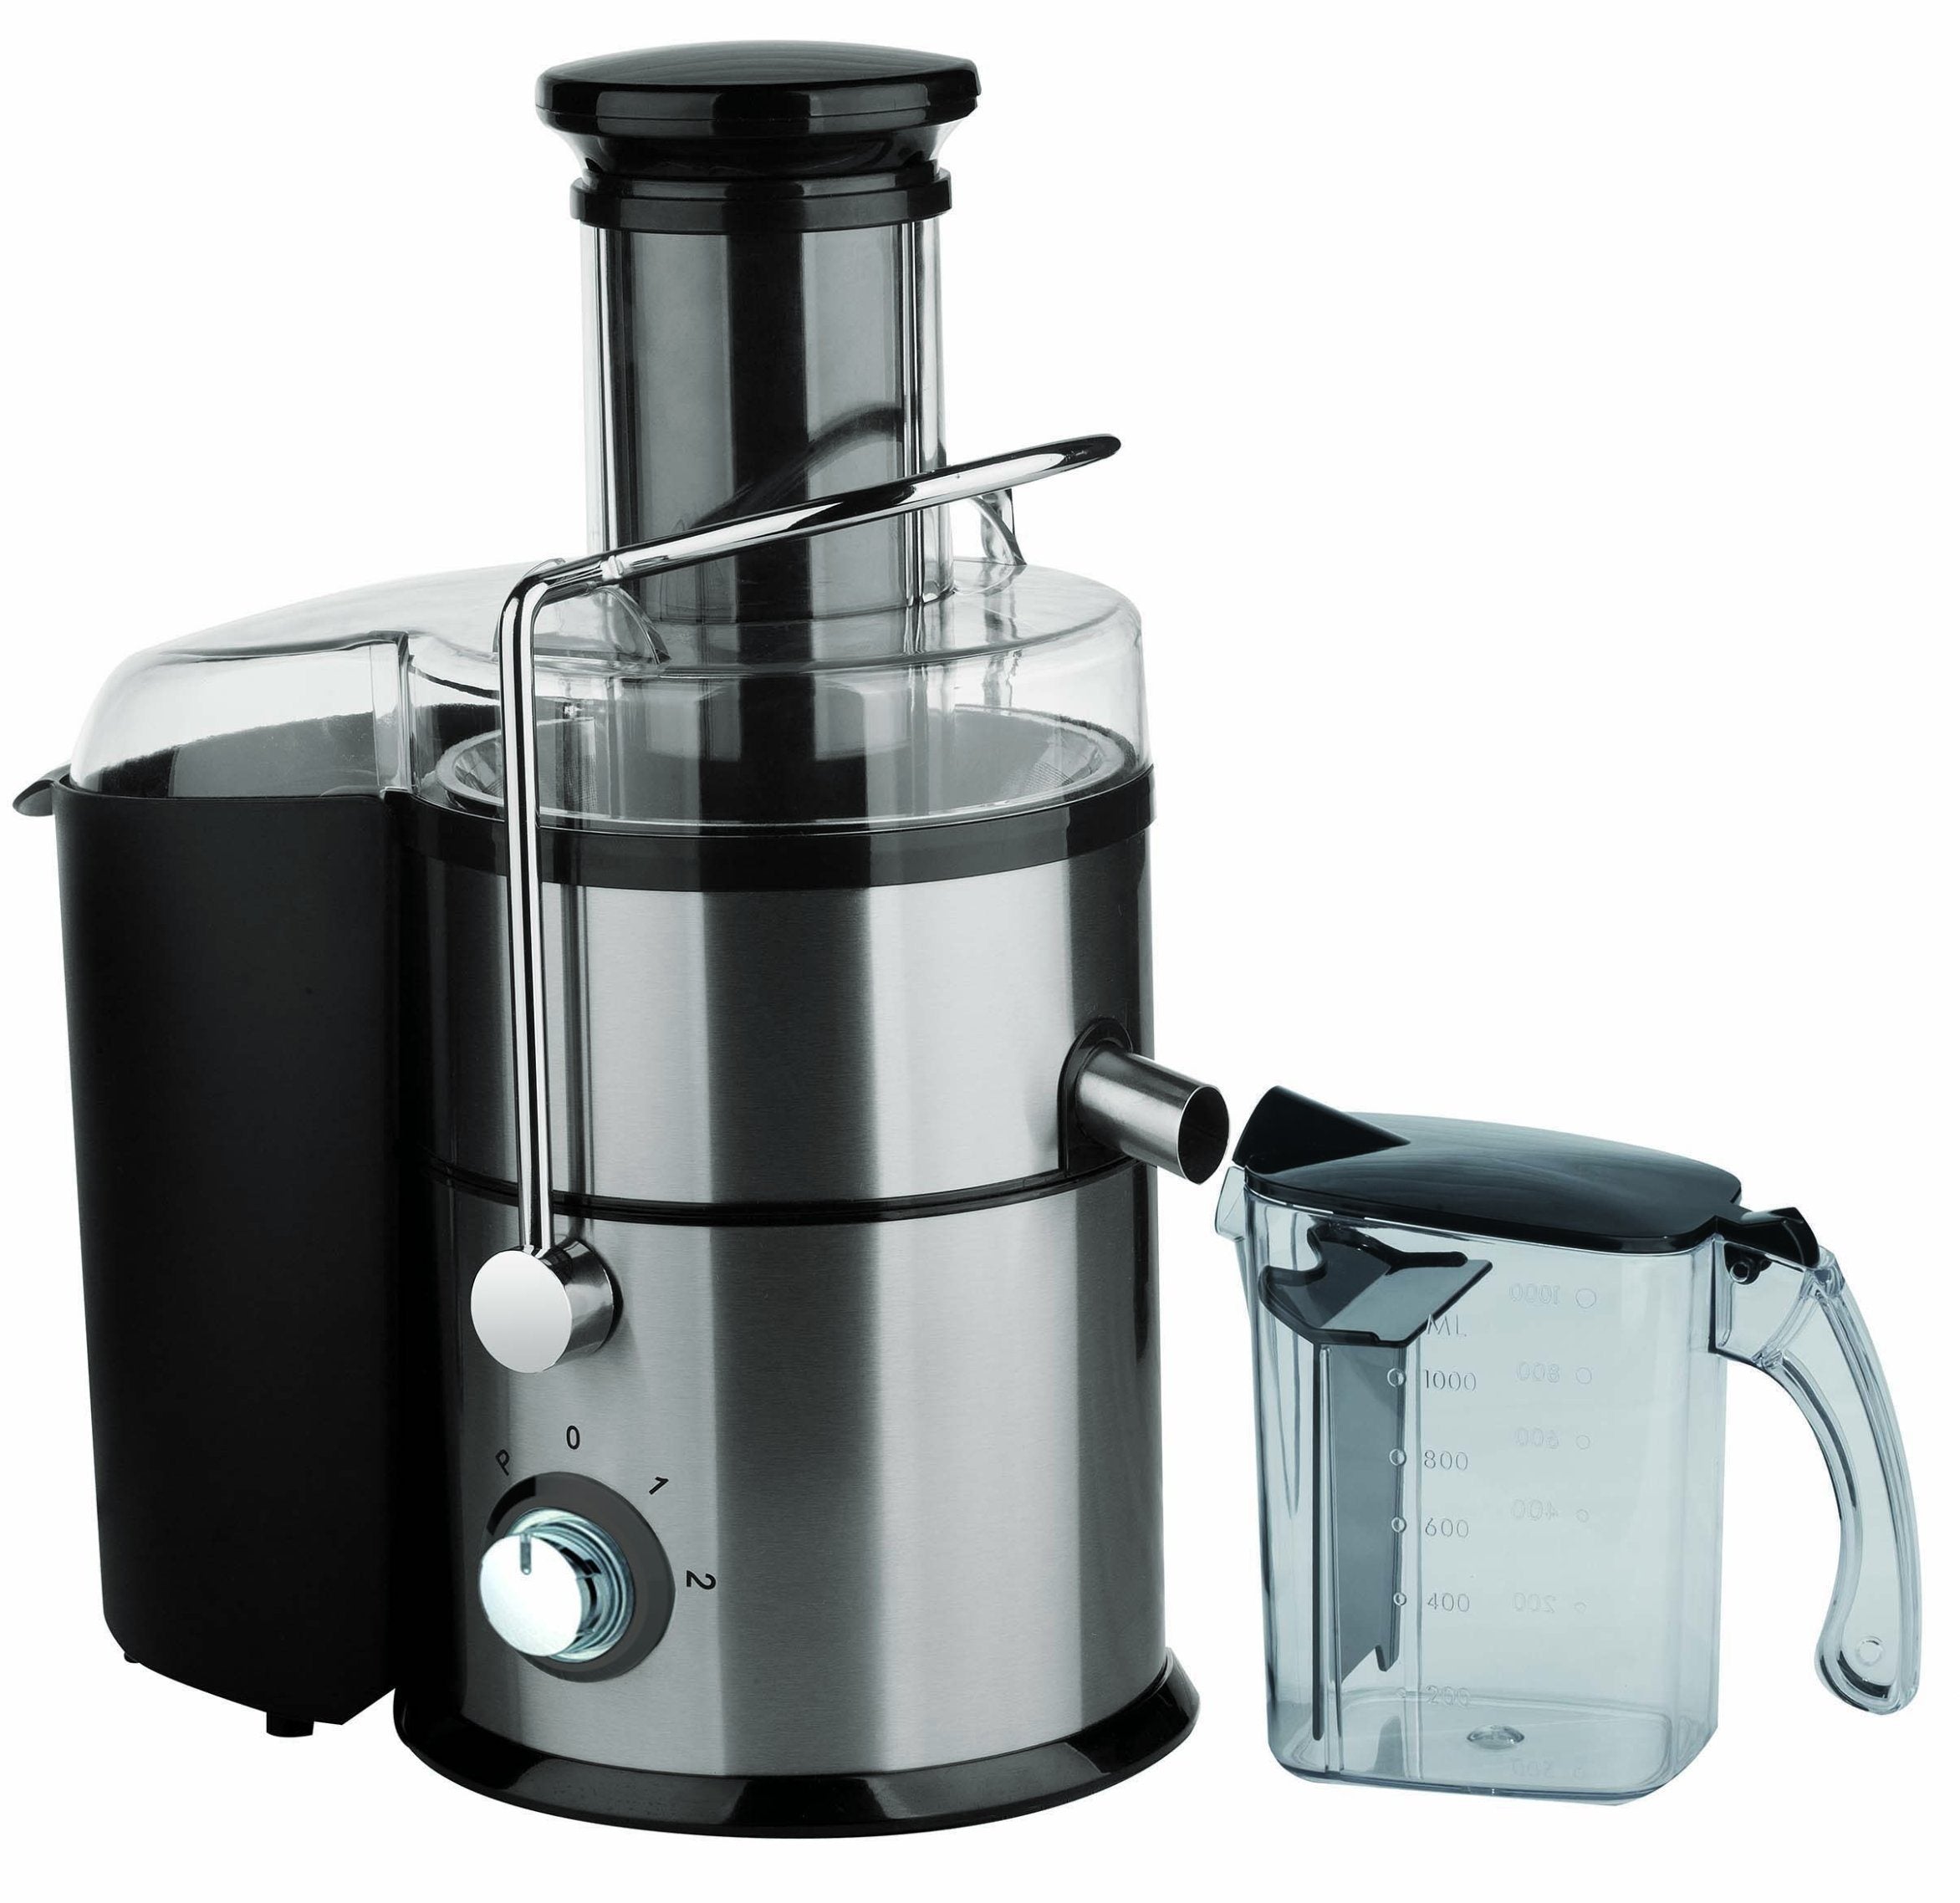 Imported American 800W Commercial Juicer